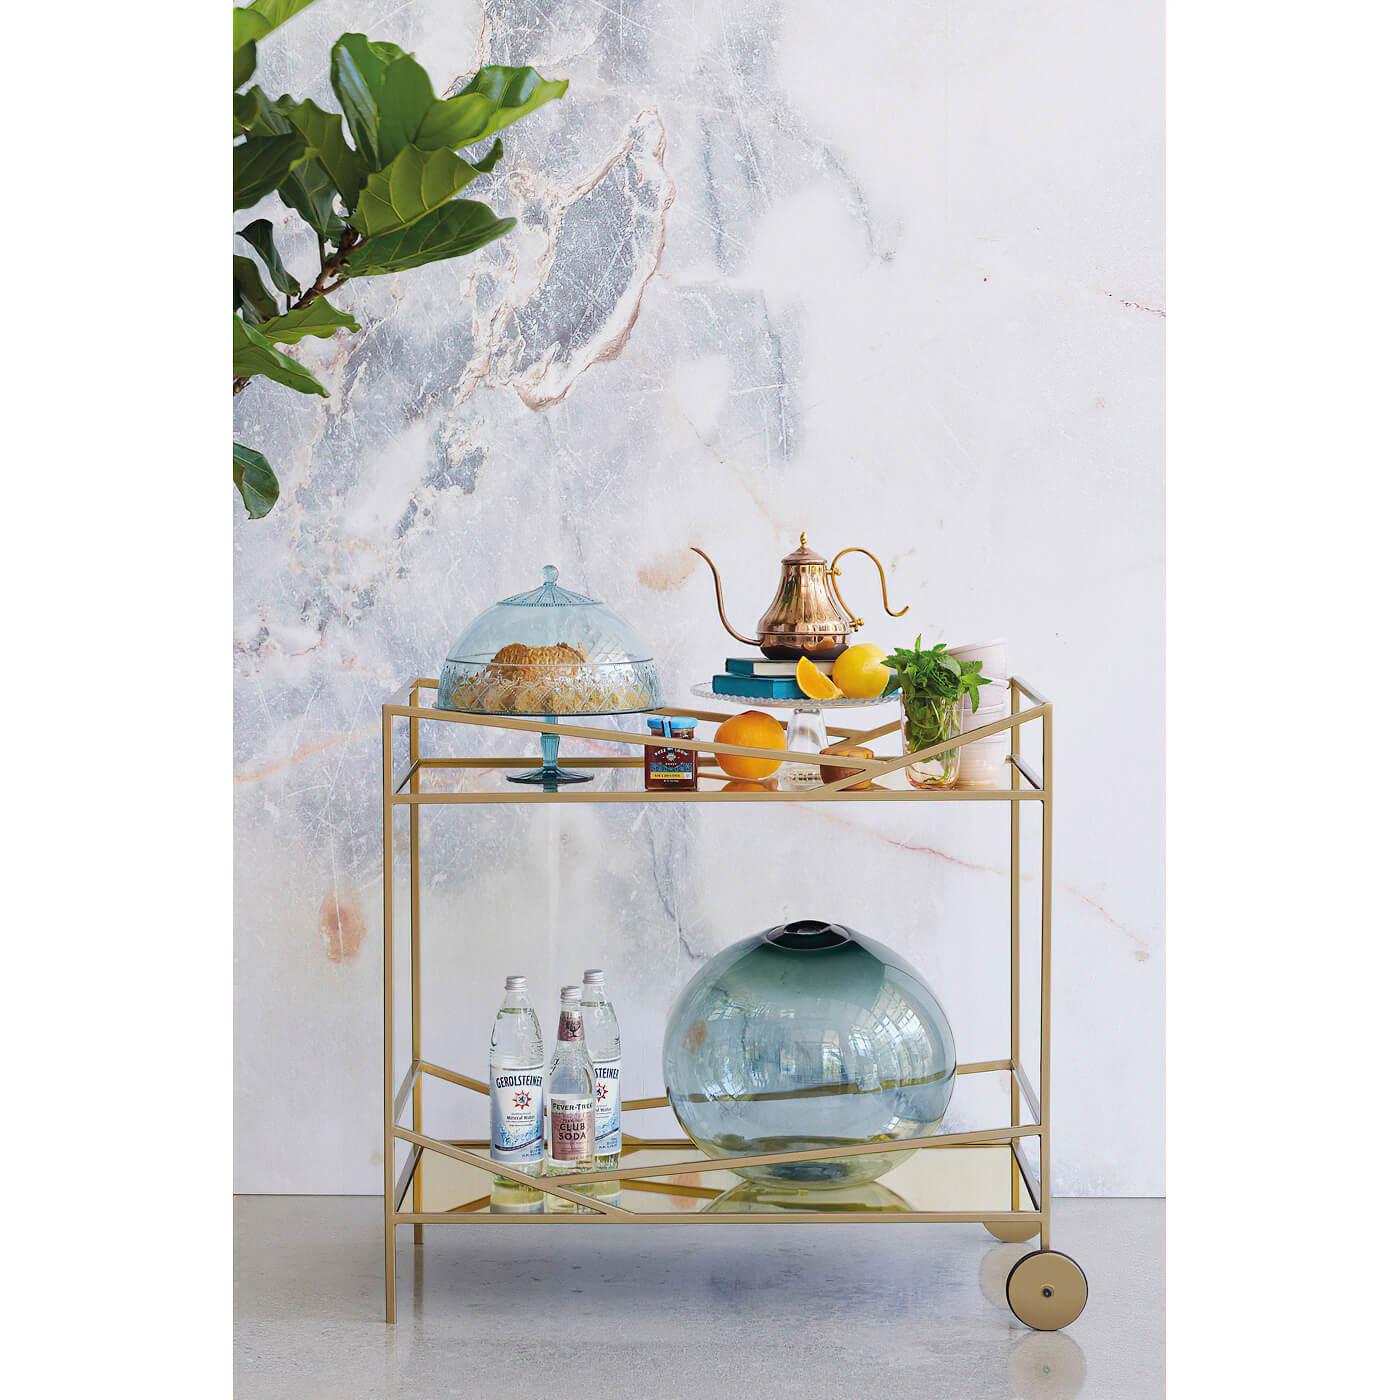 A modern geometric bar cart with an open framework design. Its architectural-inspired metal supports give this piece its modern character while the warm Lucent Bronze finish ensures it will complement any decor plan. Two bronze mirrored shelves are